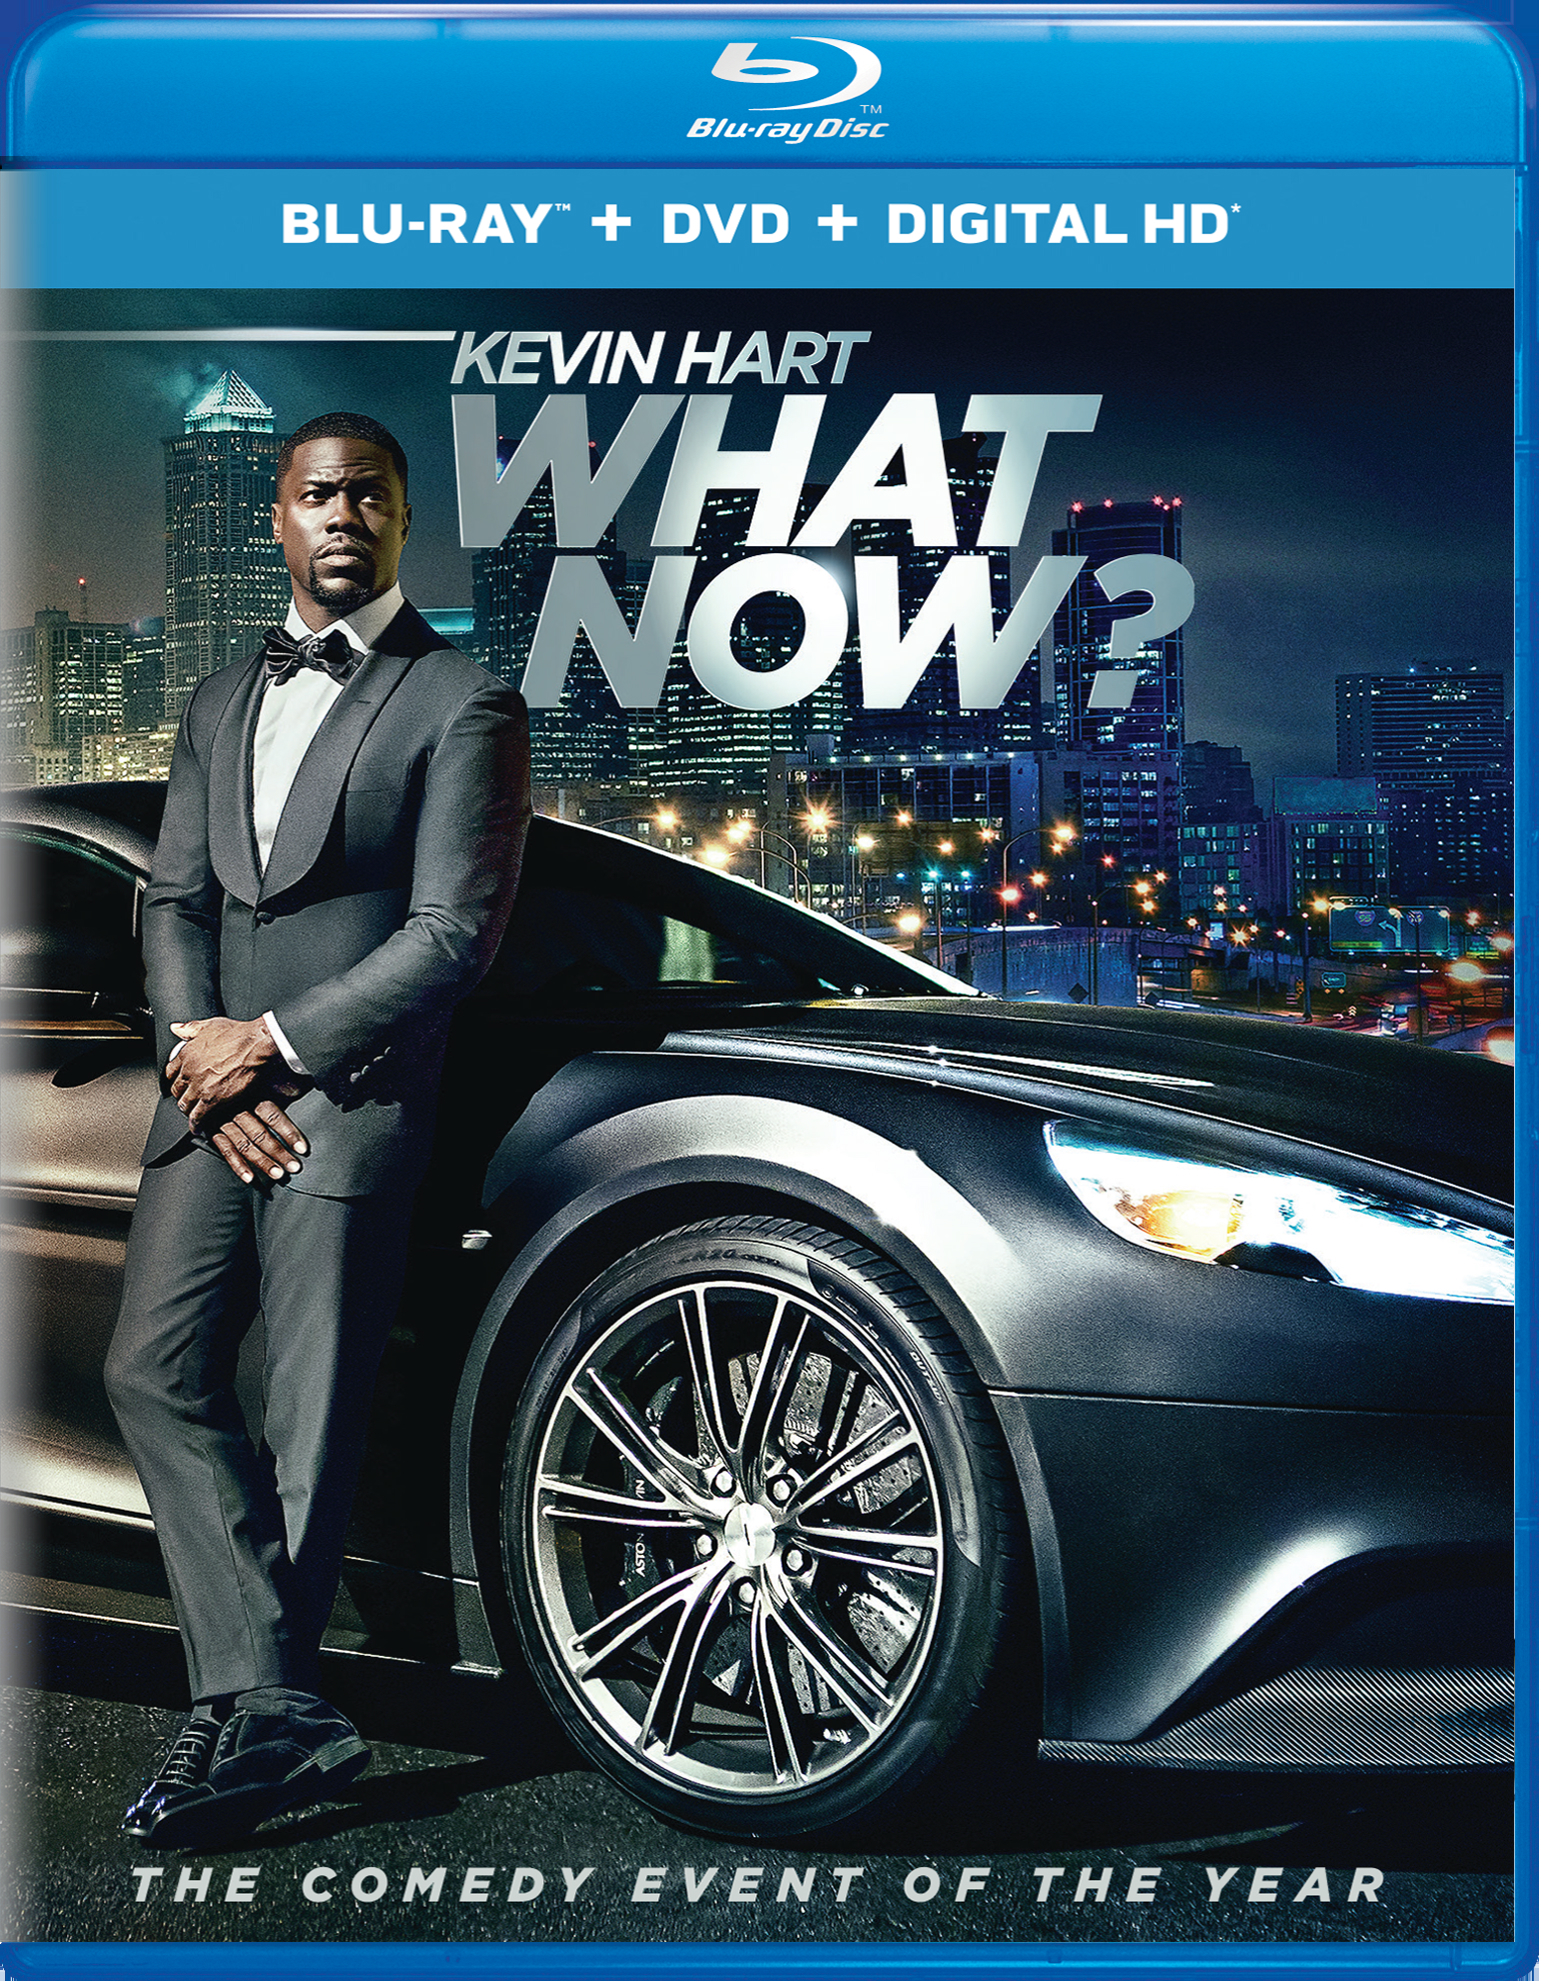 Kevin Hart - What Now? (DVD) - Blu-ray [ 2016 ]  - Stand Up Movies On Blu-ray - Movies On GRUV